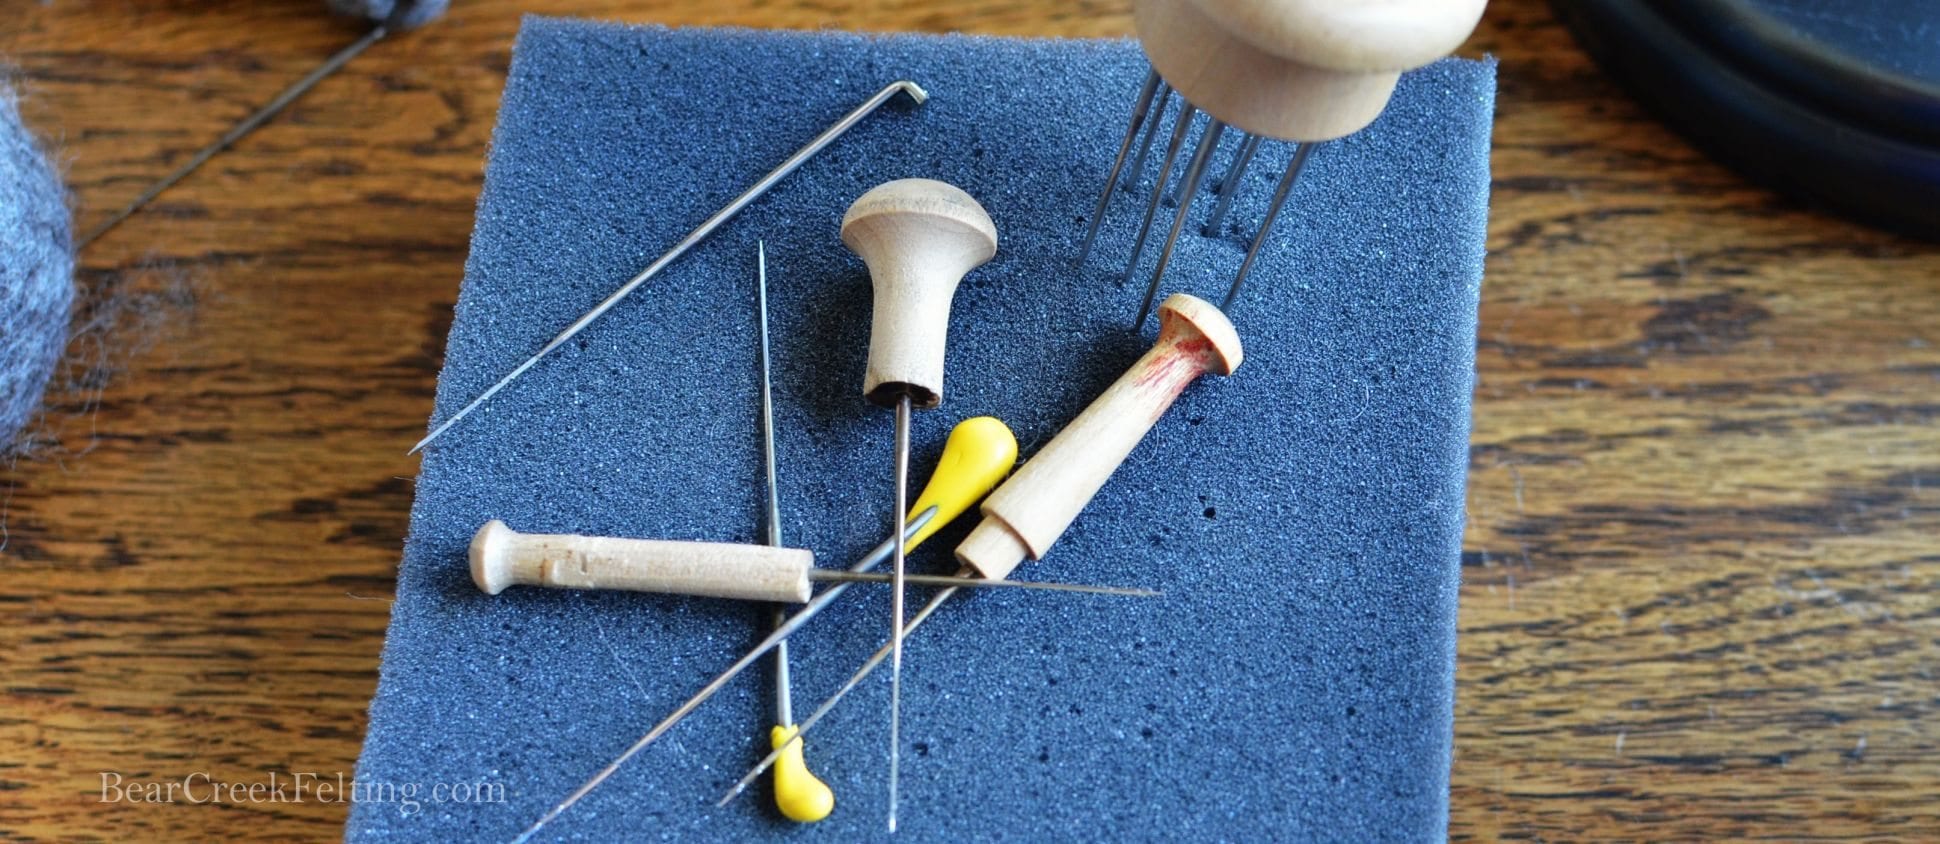 The Best, Most comfortable Needle Felting Tool I have found